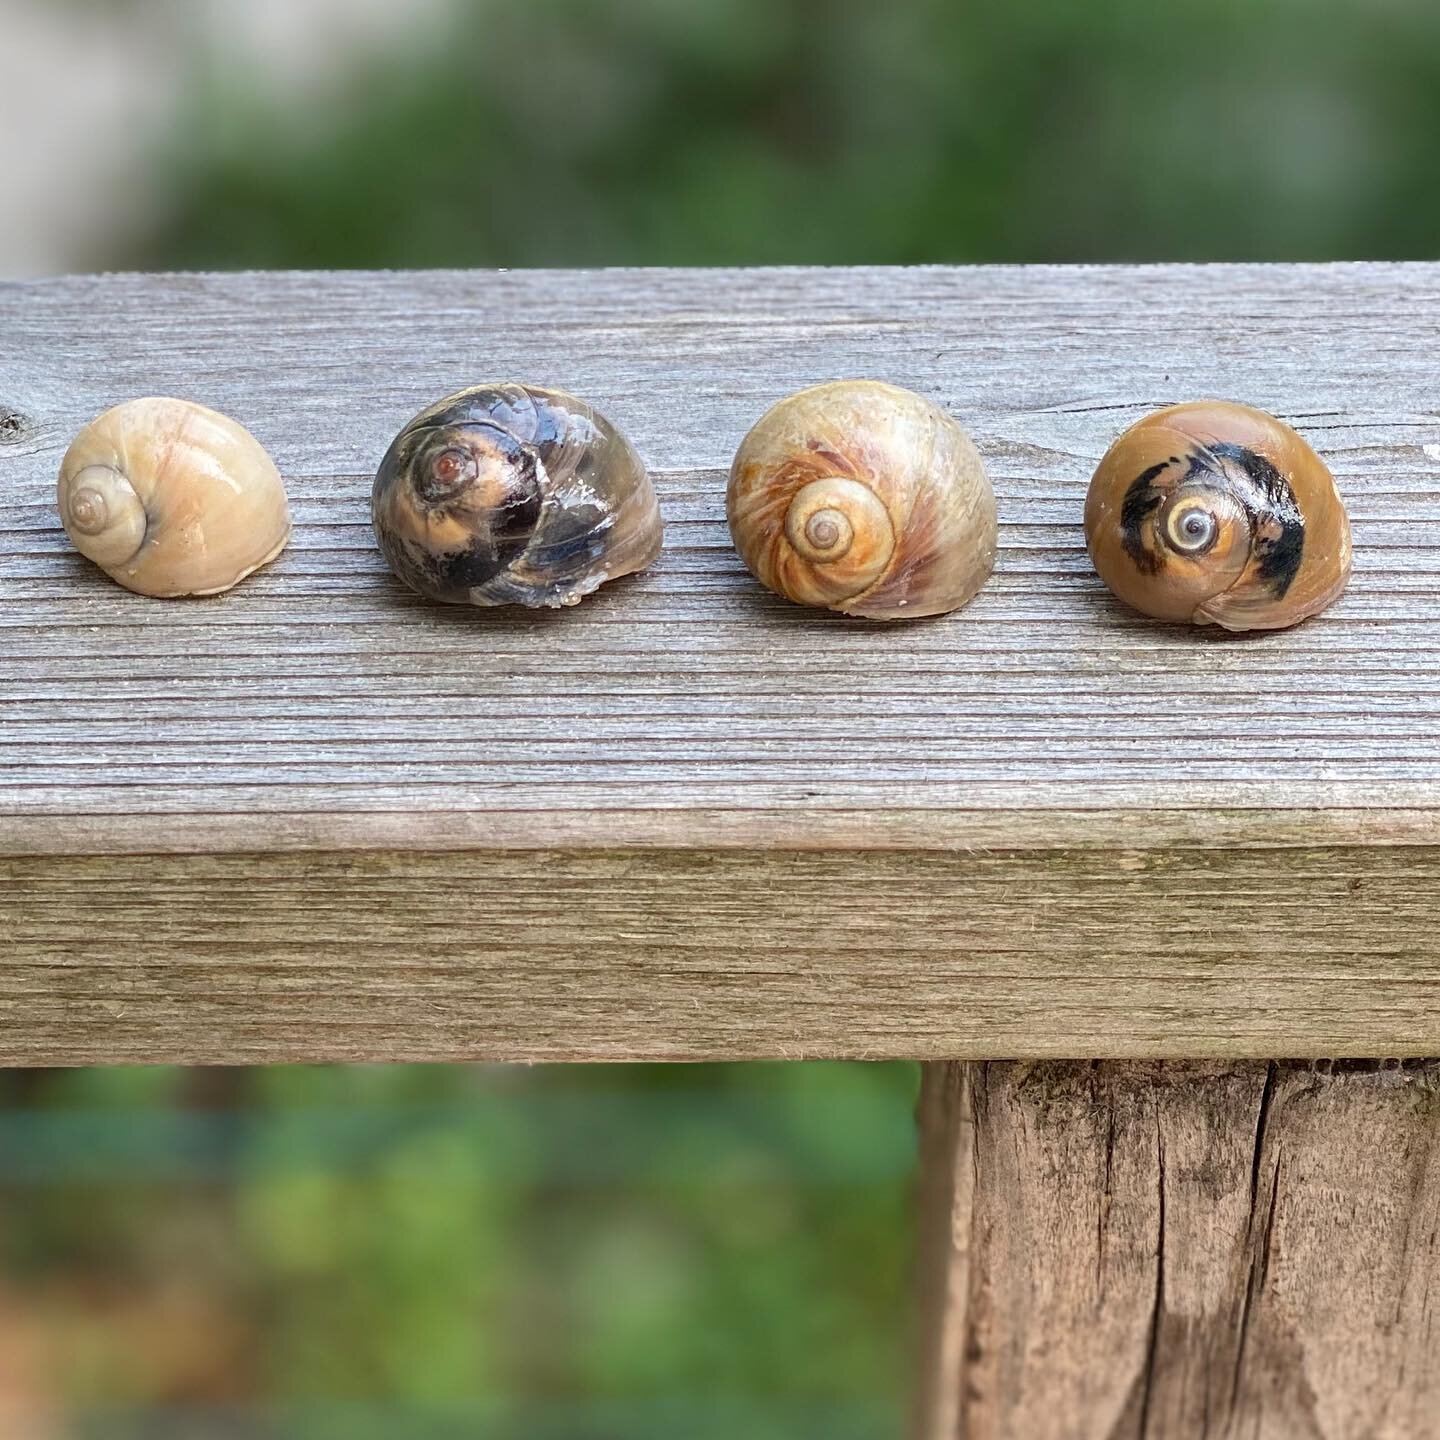 The four snail shells of the apocalypse